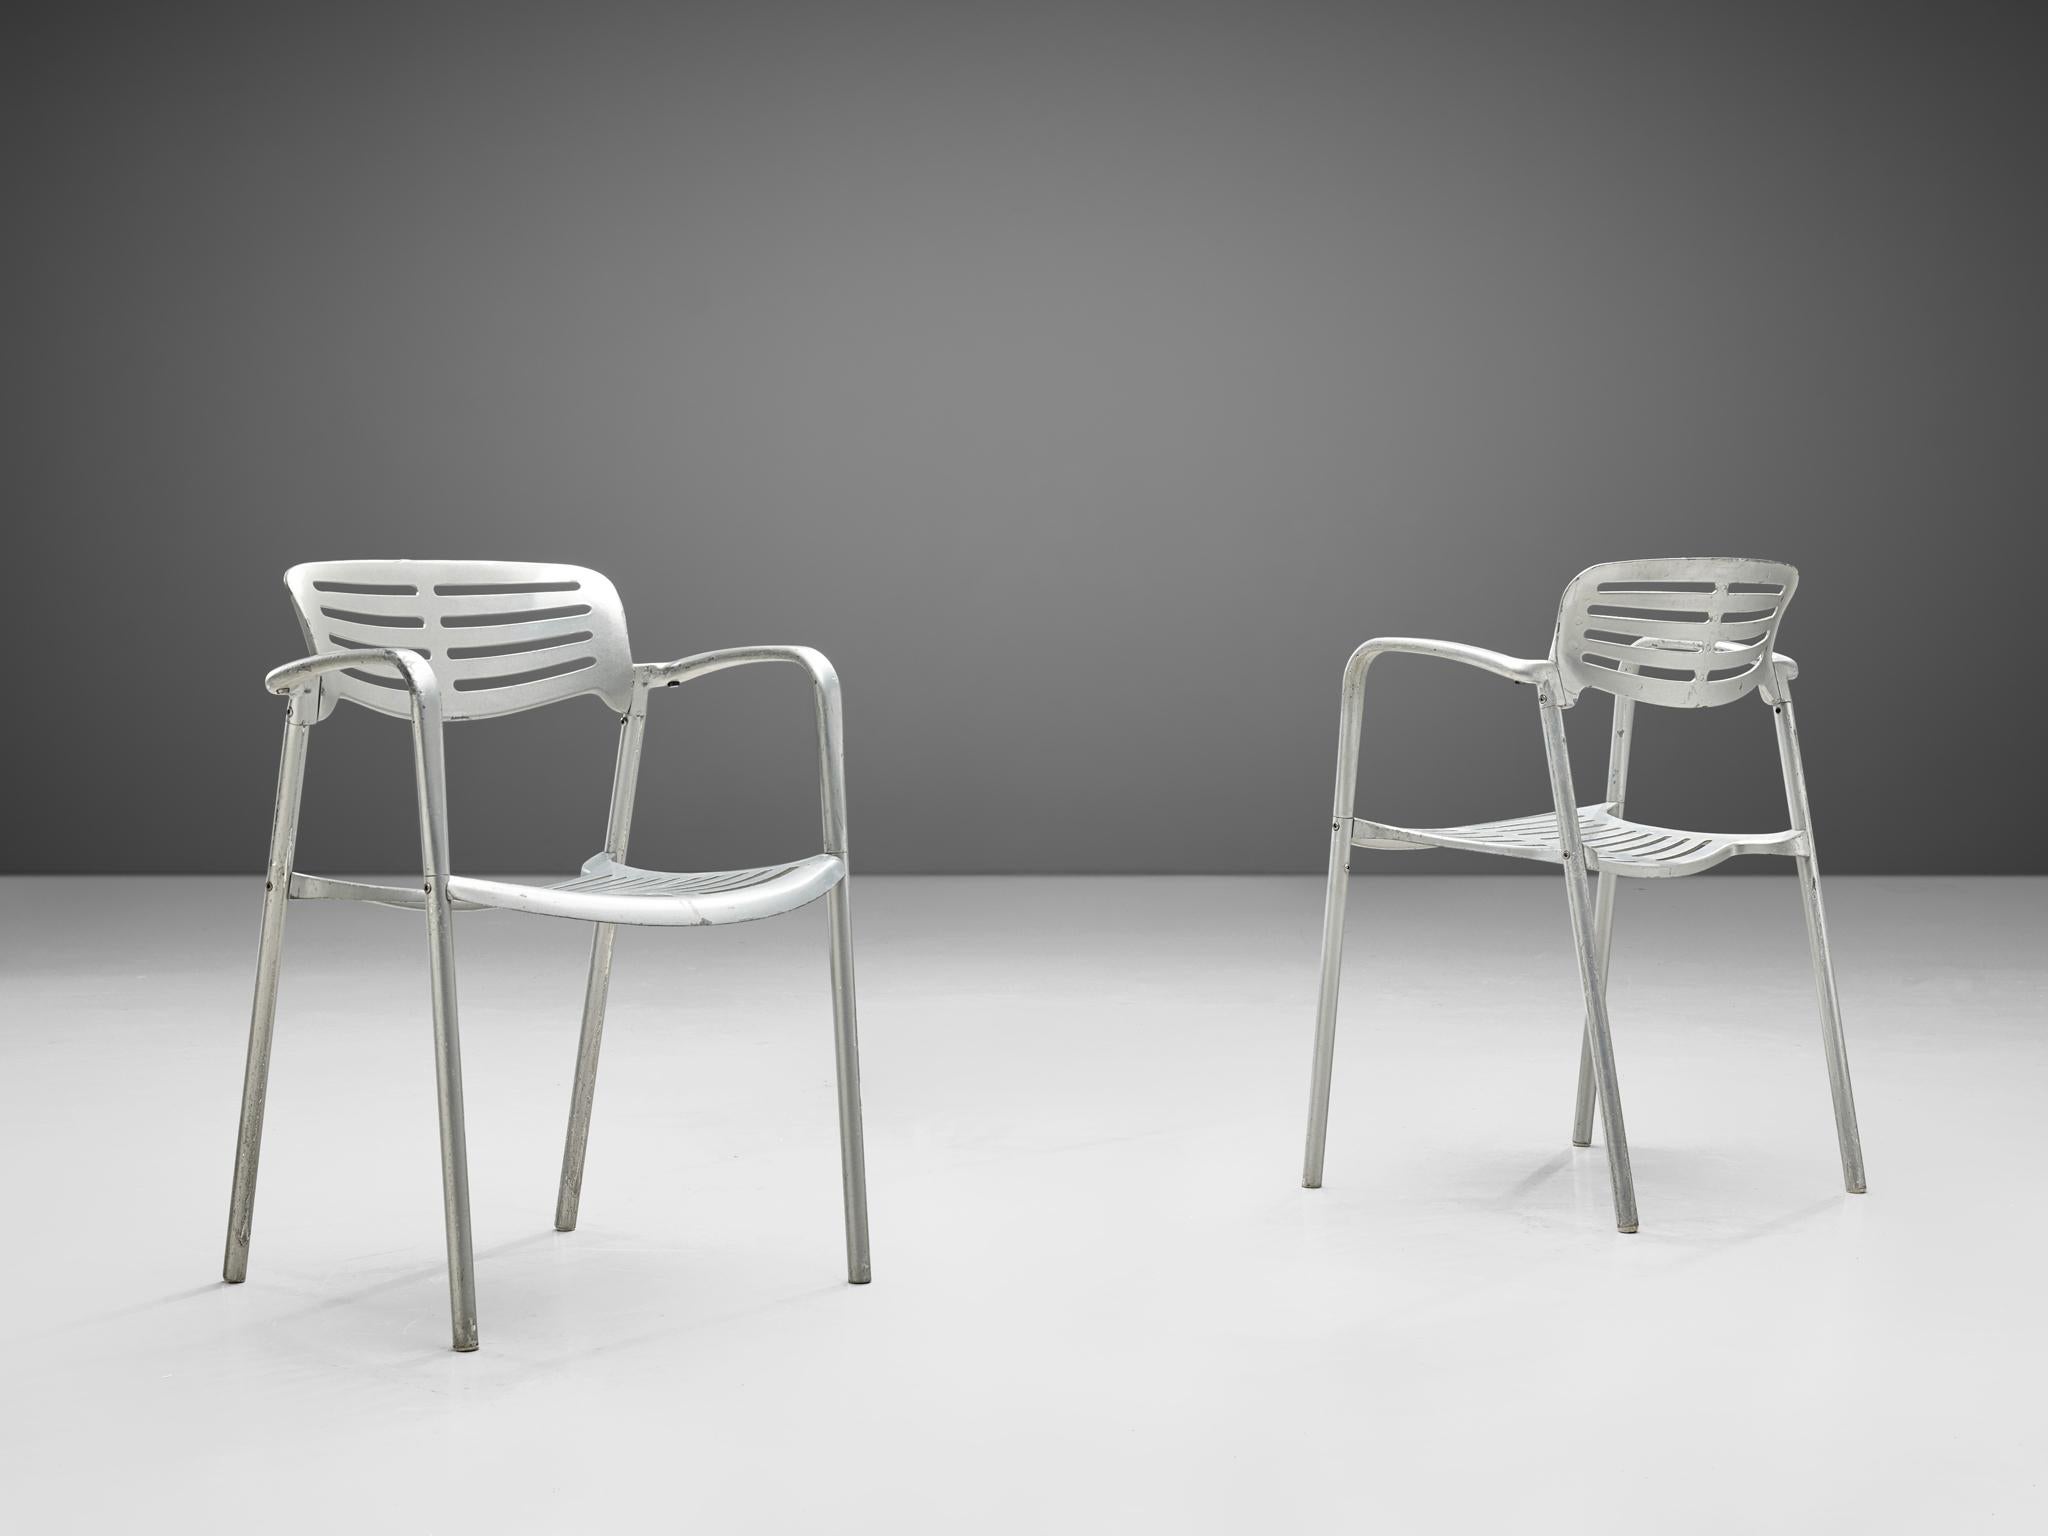 Jorge Pensi, armchairs, aluminum, Spain, 1988

A set of of Jorge Spensi's aluminum chairs of the Toledo collection. Pensi designed the 'Toledo' chairs and the 'Toledo' table for the manufacturer Amat-3. Later the designs were adopted by Knoll